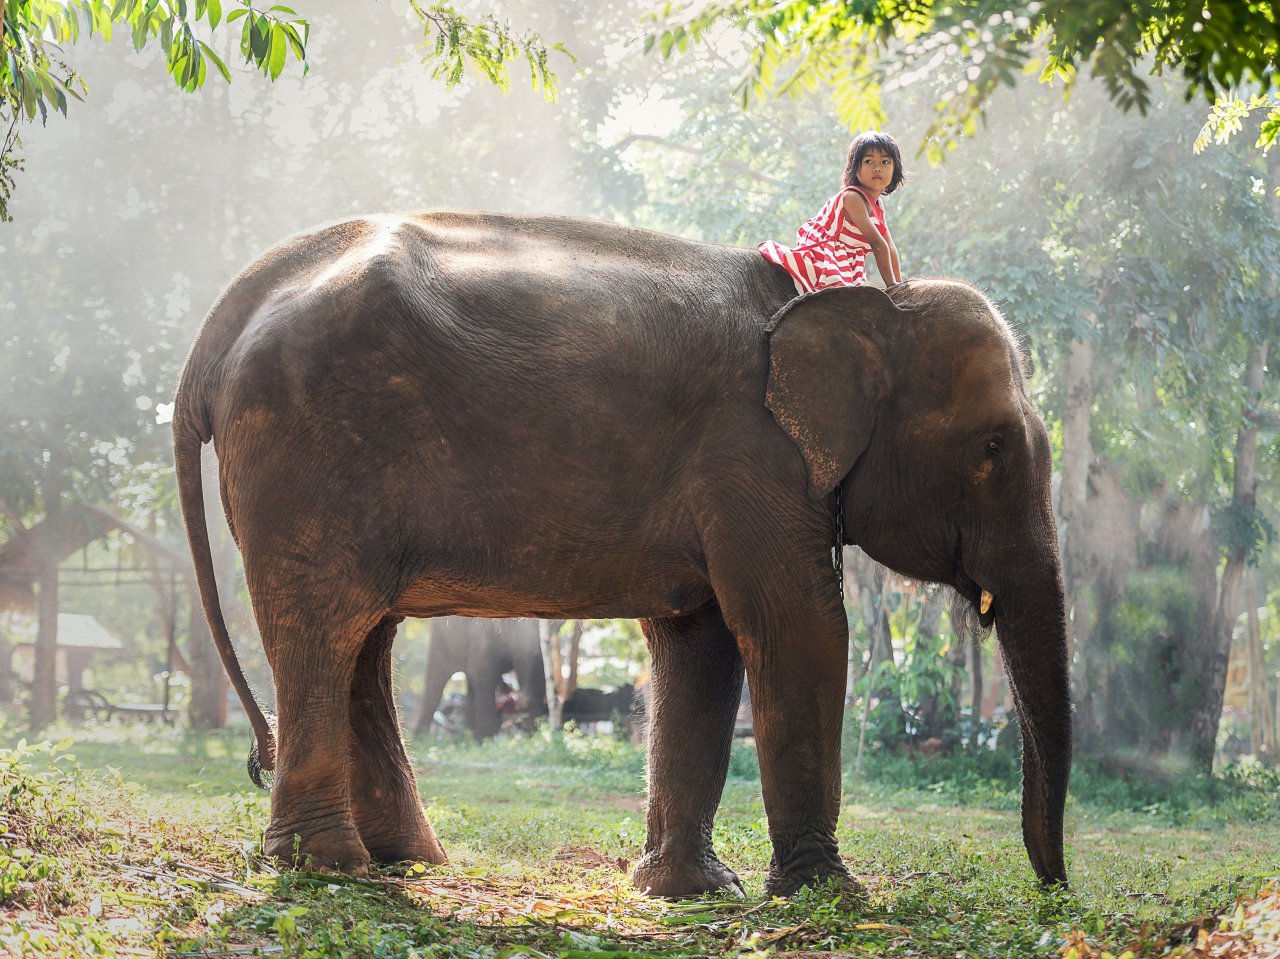 Little Girl with Elephant jigsaw puzzle